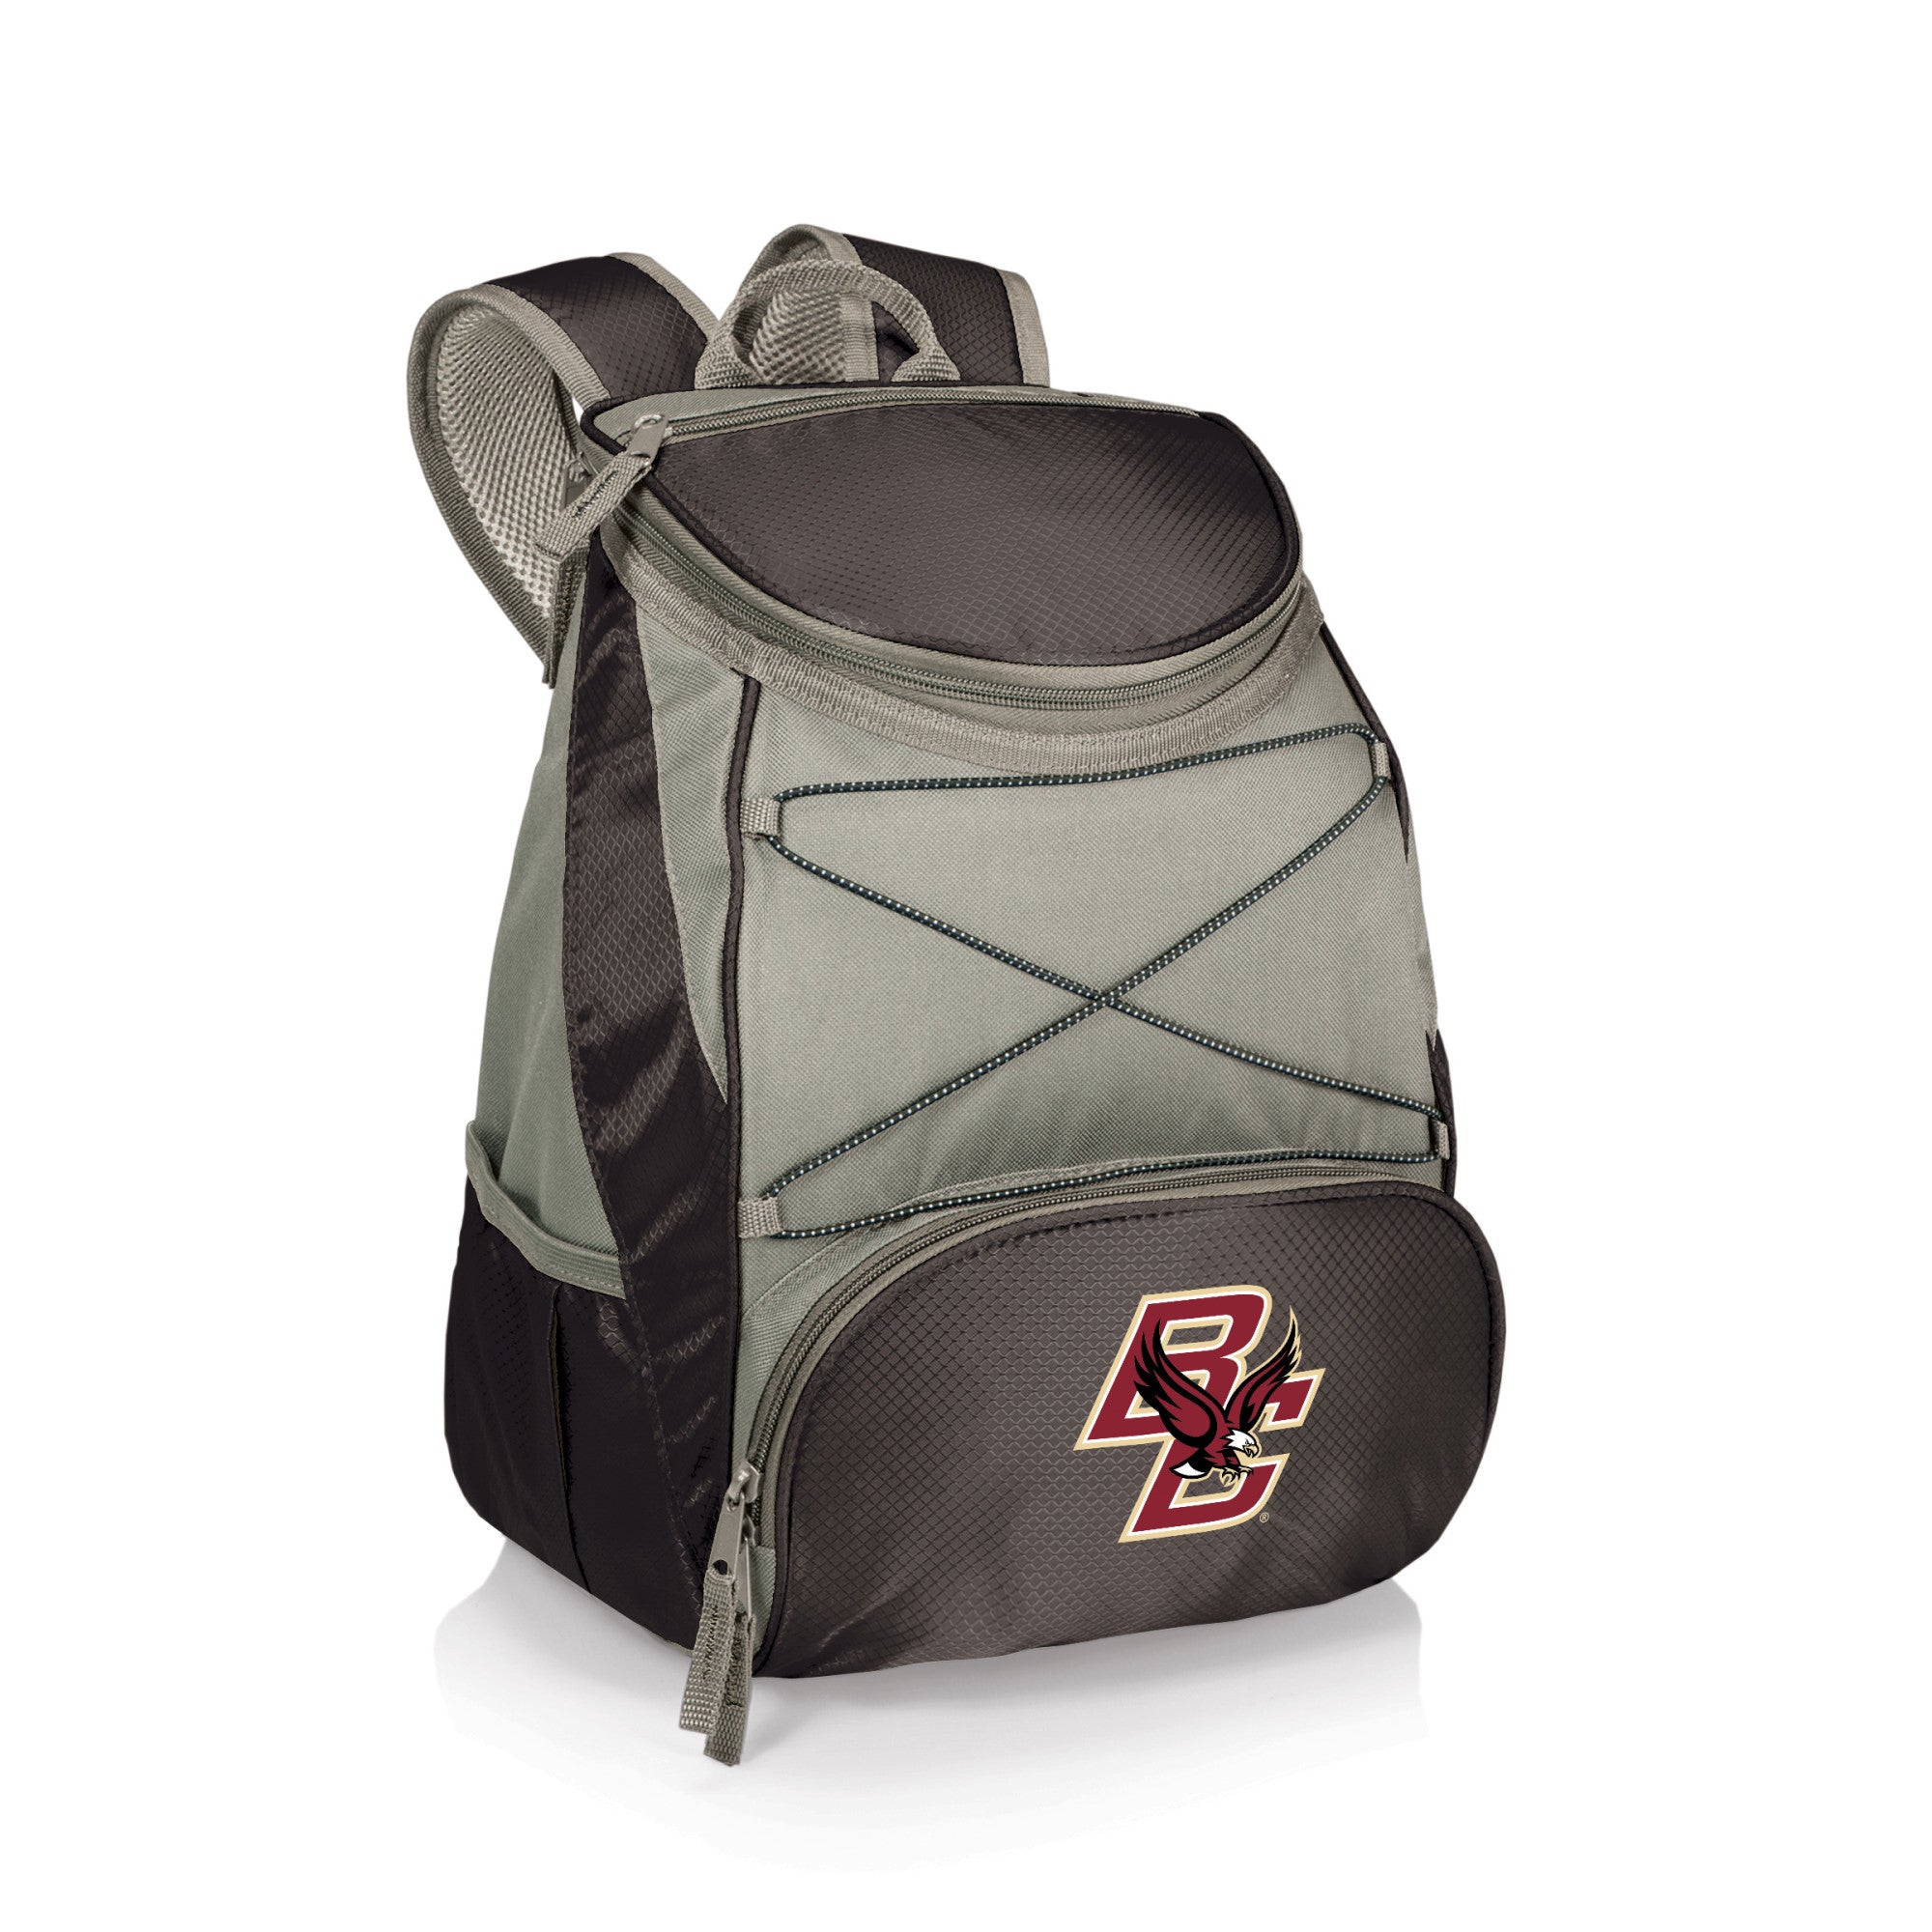 Boston College Eagles - PTX Backpack Cooler, (Black with Gray Accents)